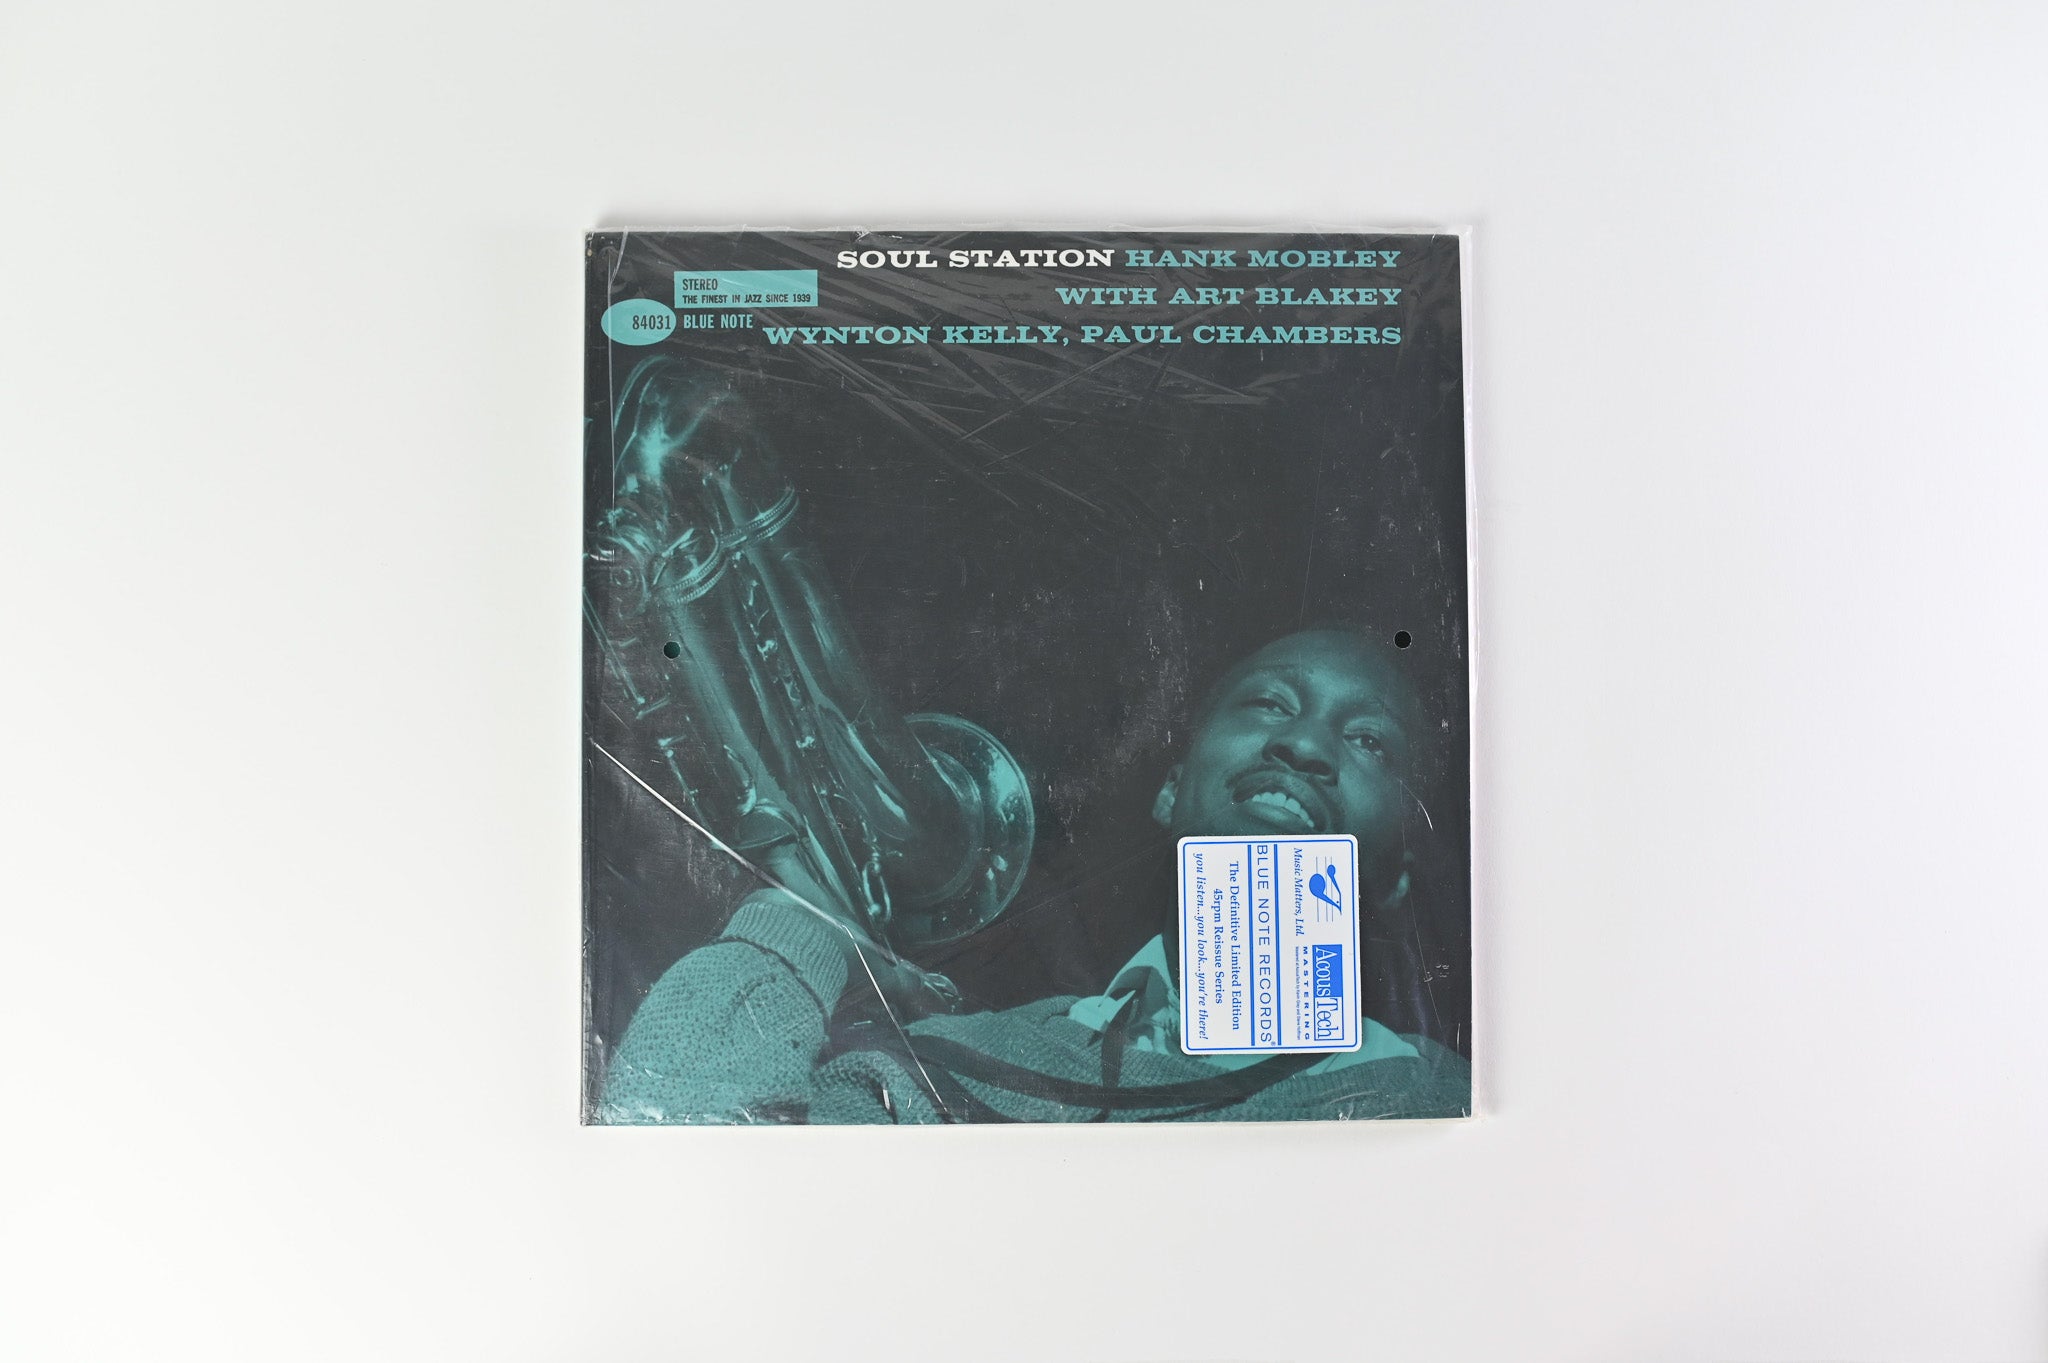 Hank Mobley - Soul Station on Blue Note Music Matters Ltd. Reissue Numbered 45 RPM